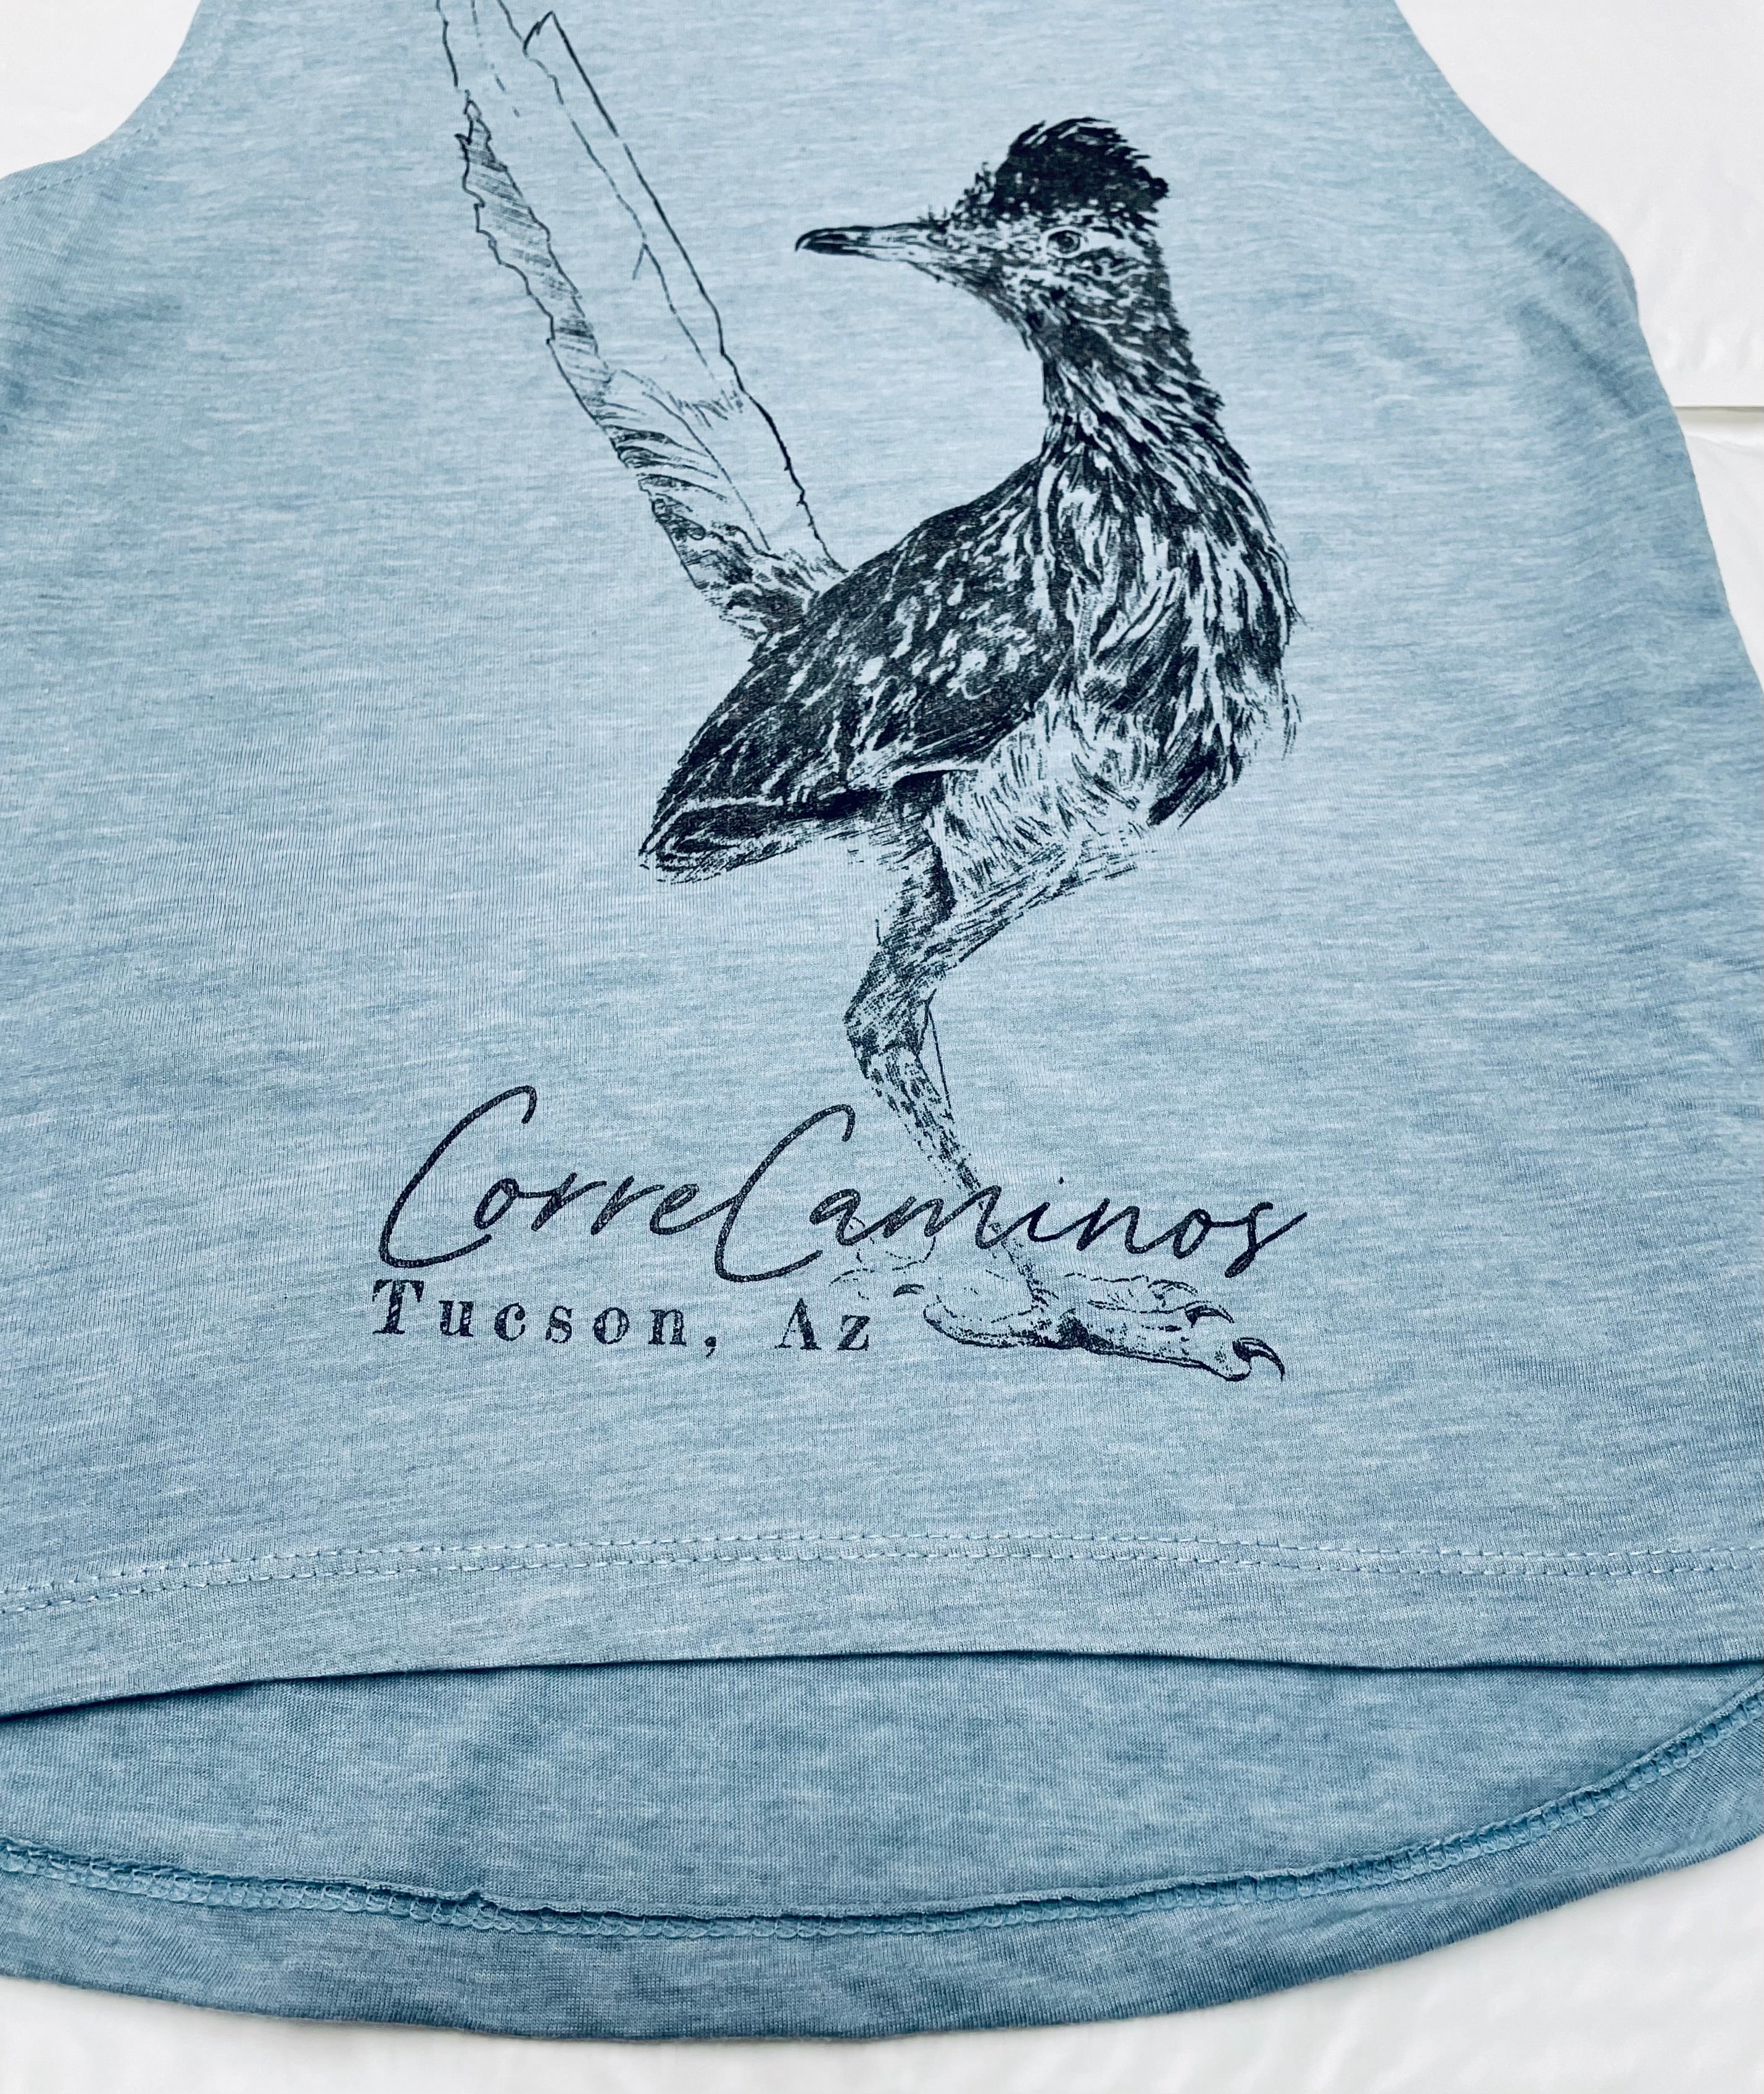 NEW color and style -- Corre Caminos (Roadrunner) Tank